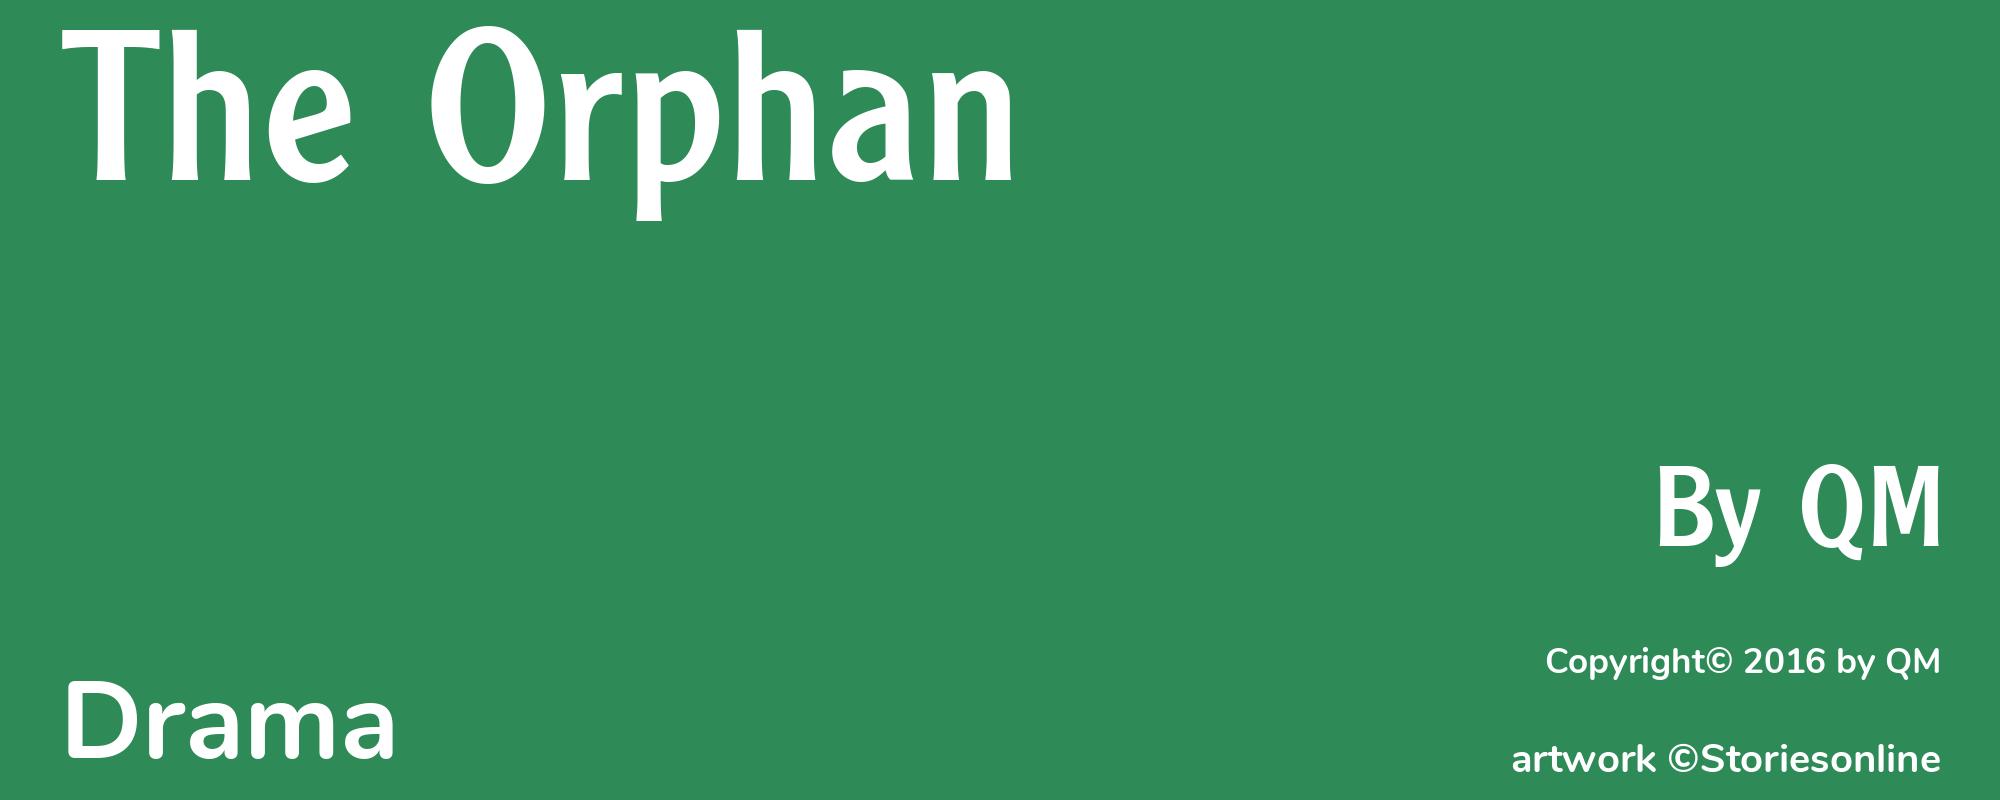 The Orphan - Cover